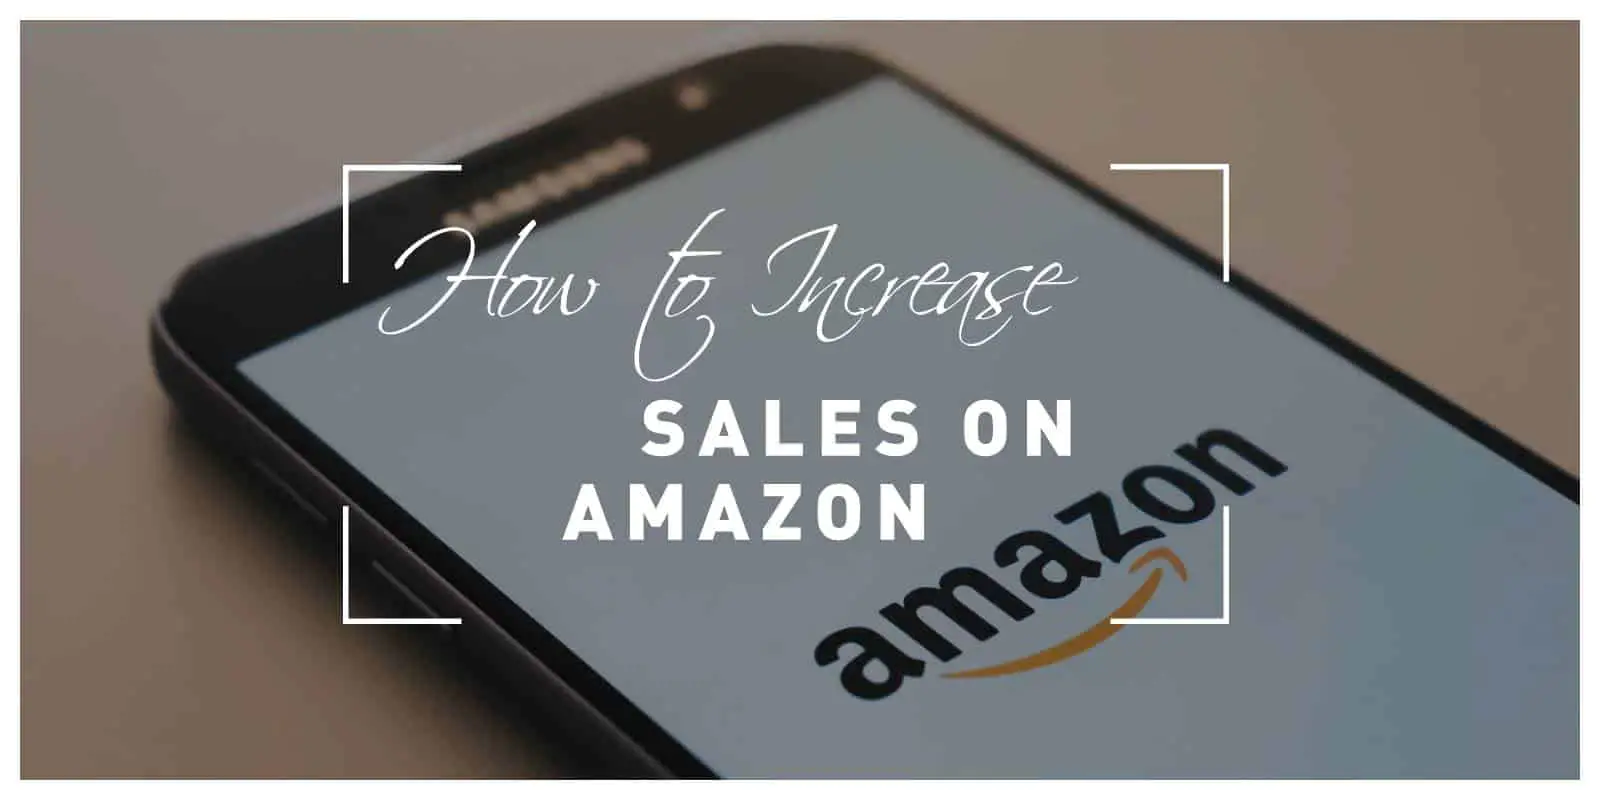 How to Increase Sales on Amazon